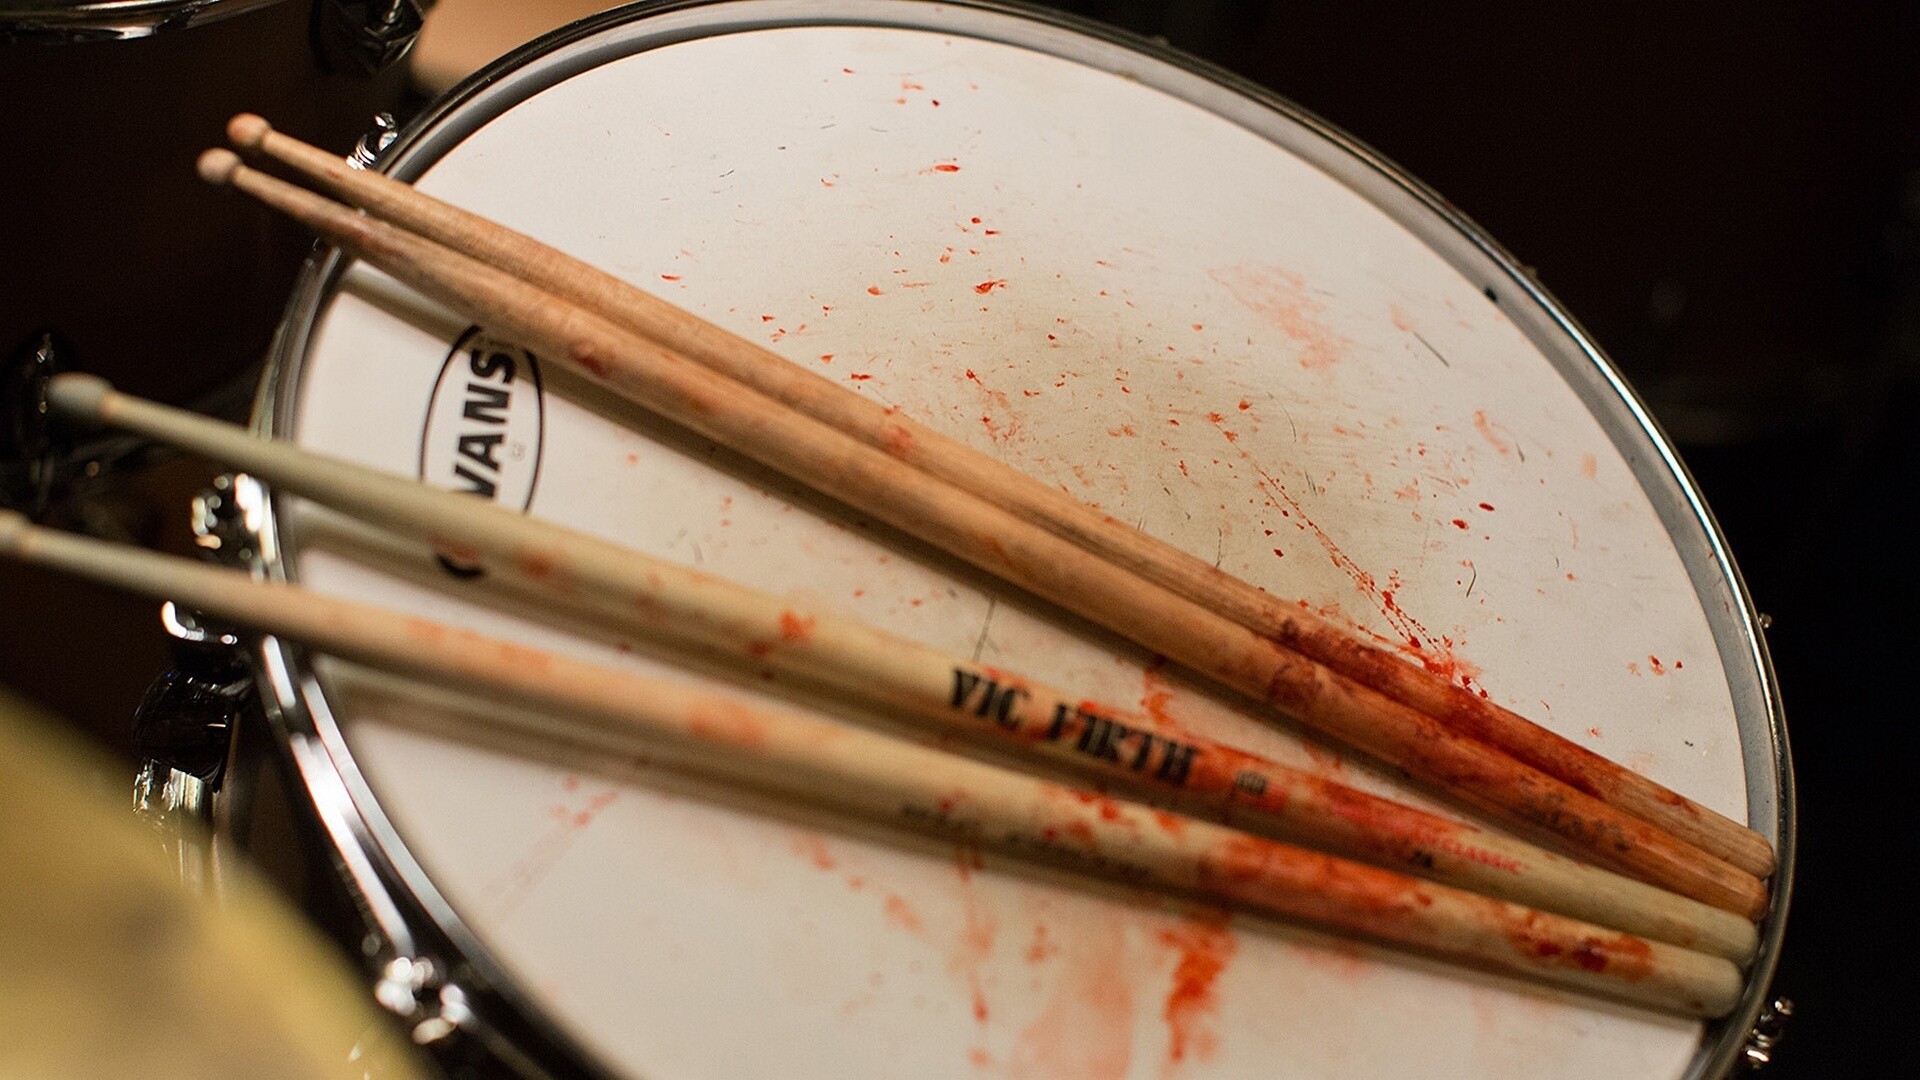 Whiplash: The film opened in a limited release on October 10, 2014, in 6 theaters. 1920x1080 Full HD Wallpaper.